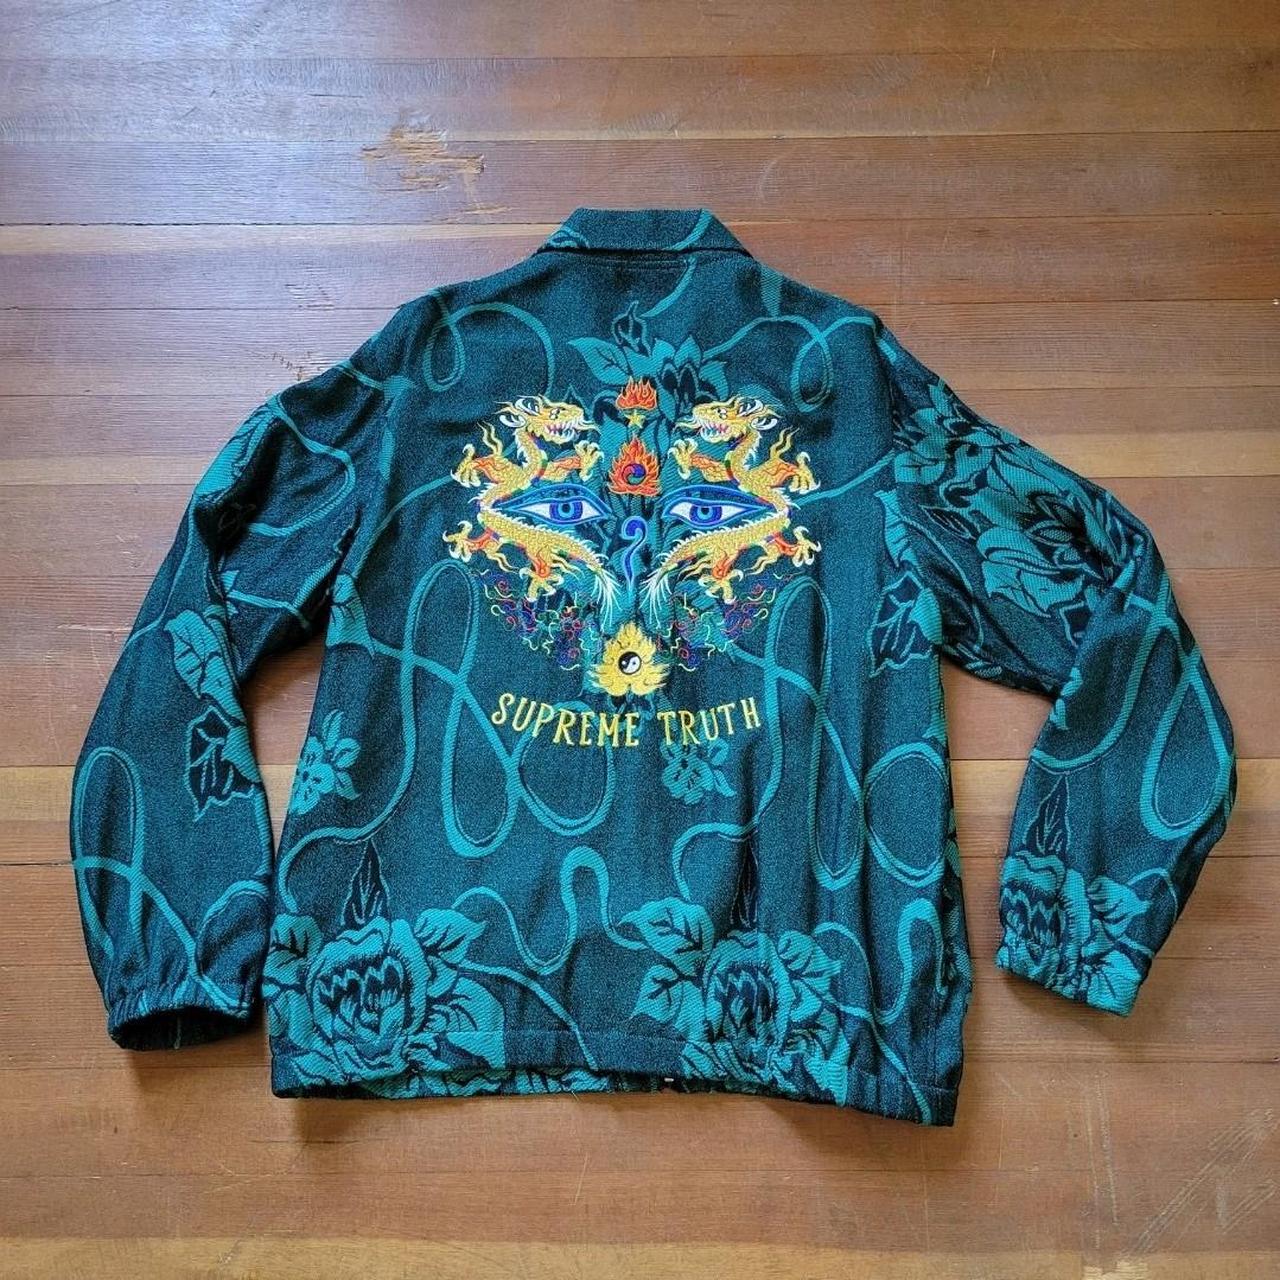 y2k 2017 SUPREME Truth Tour Jacket abstract... - Depop